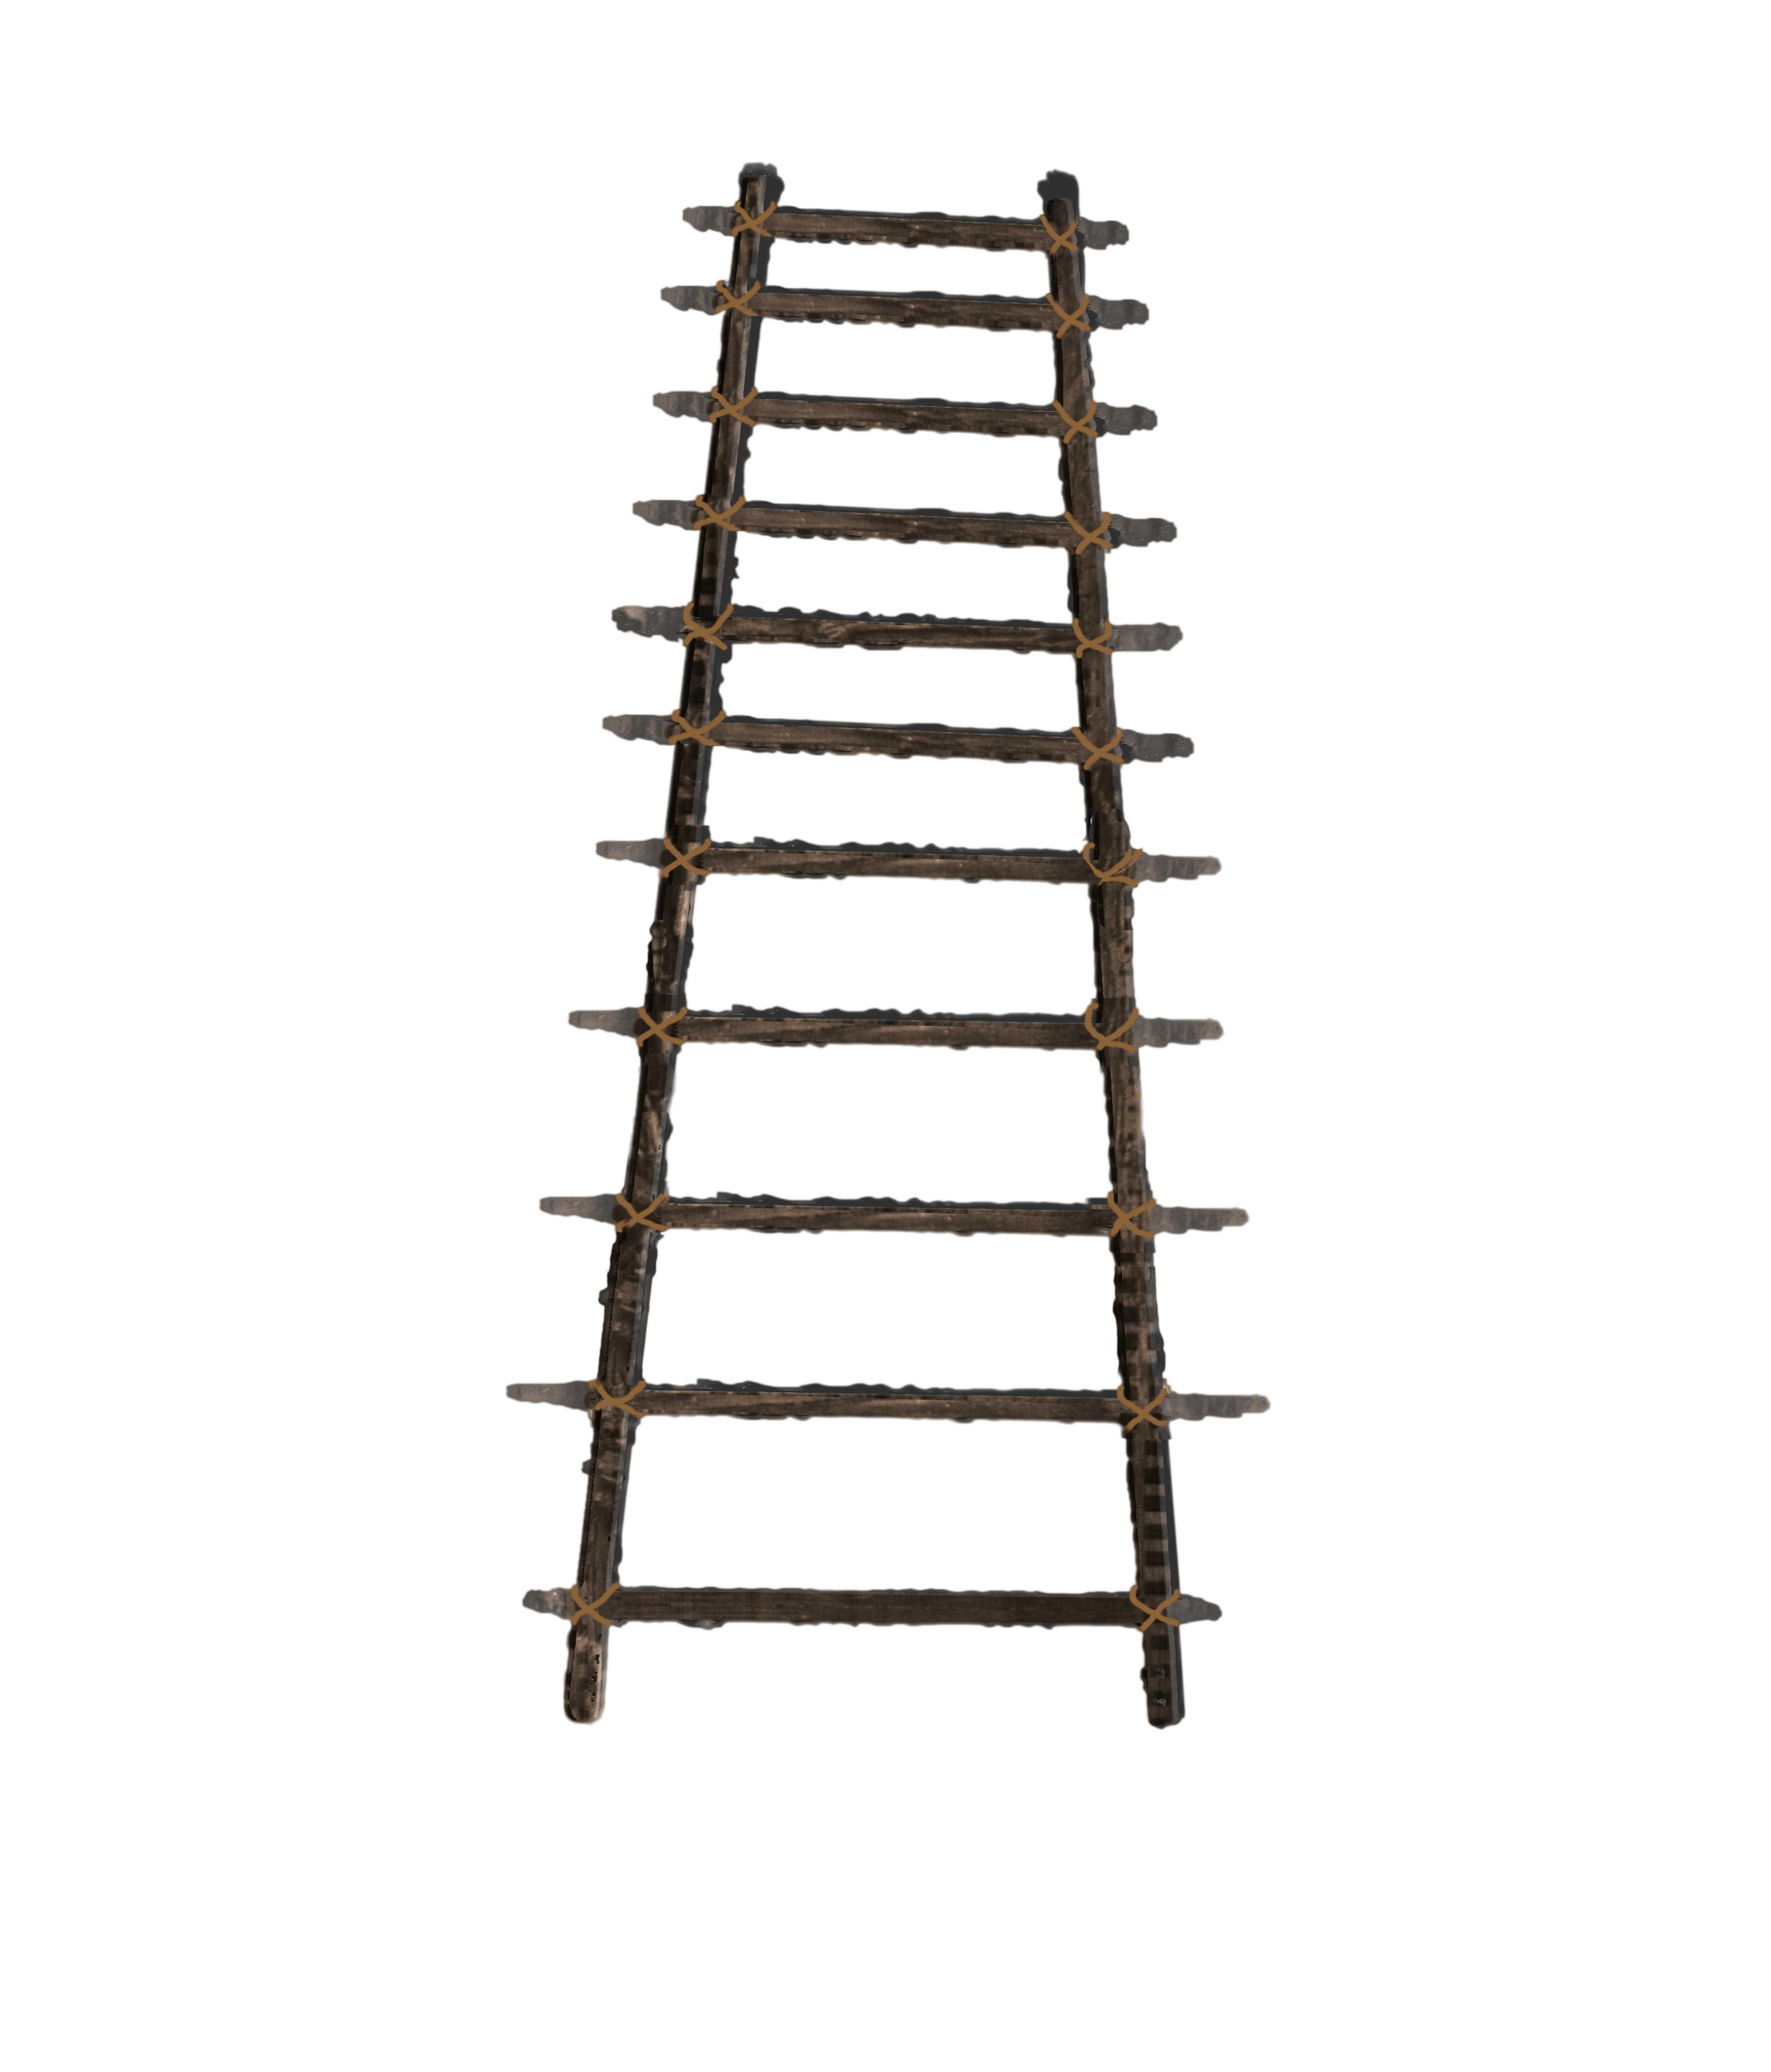 Ladder Png File By Annamae22 Ladder Png File By Annamae22 - Ladder, Transparent background PNG HD thumbnail